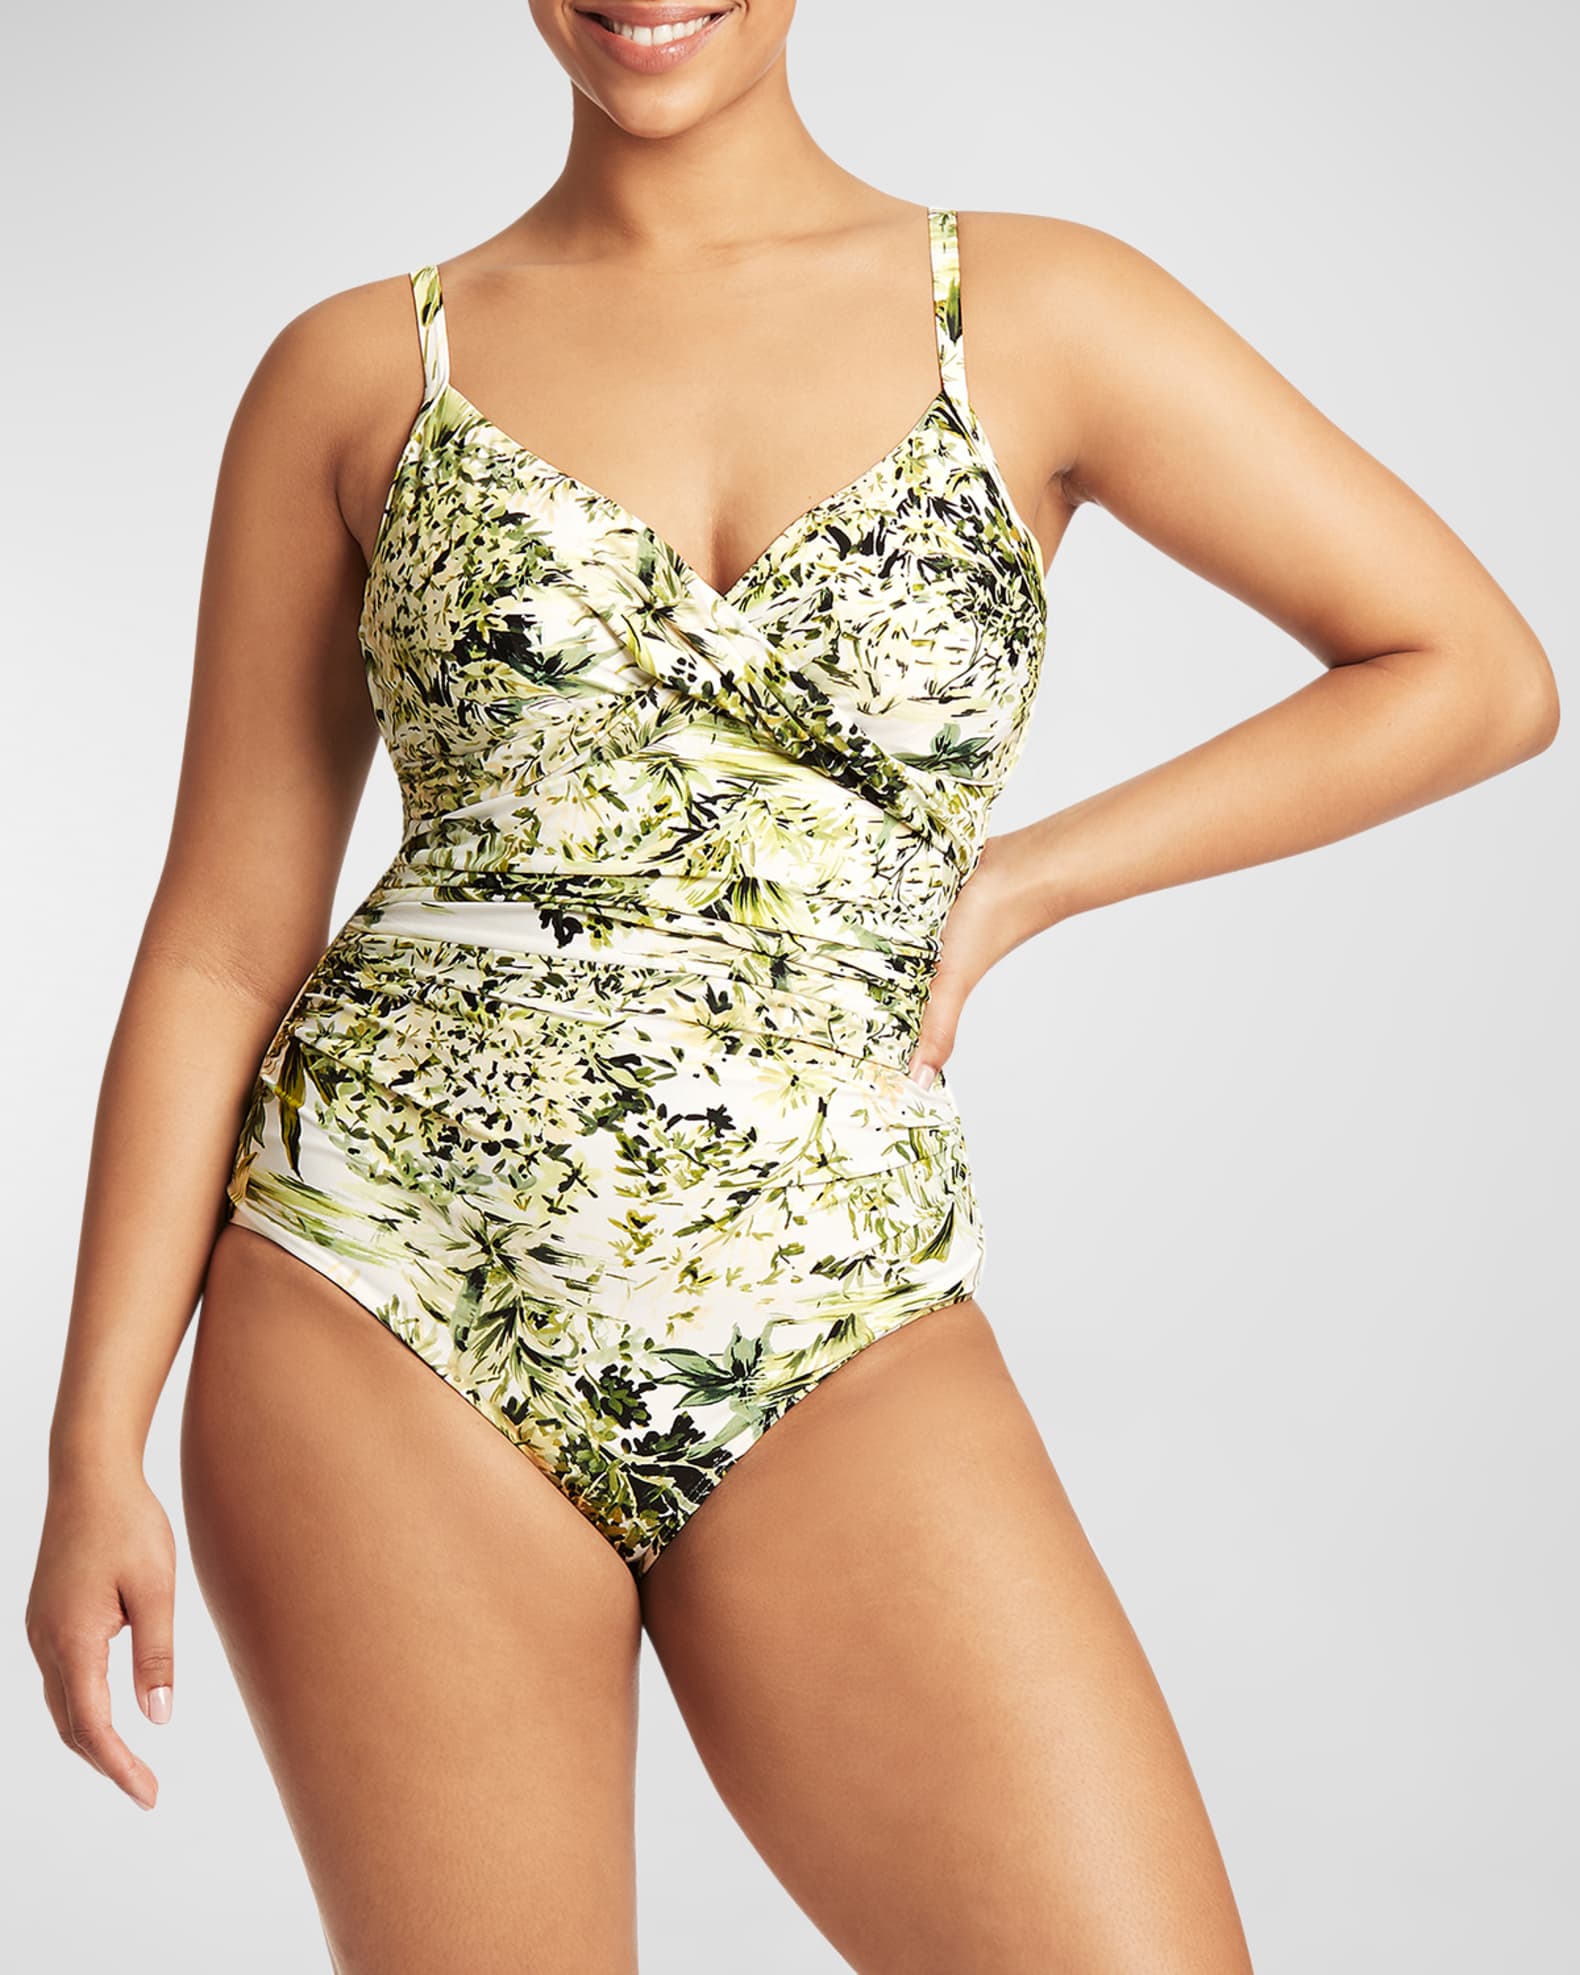 NETWORK DD Cup One-piece Swimsuit